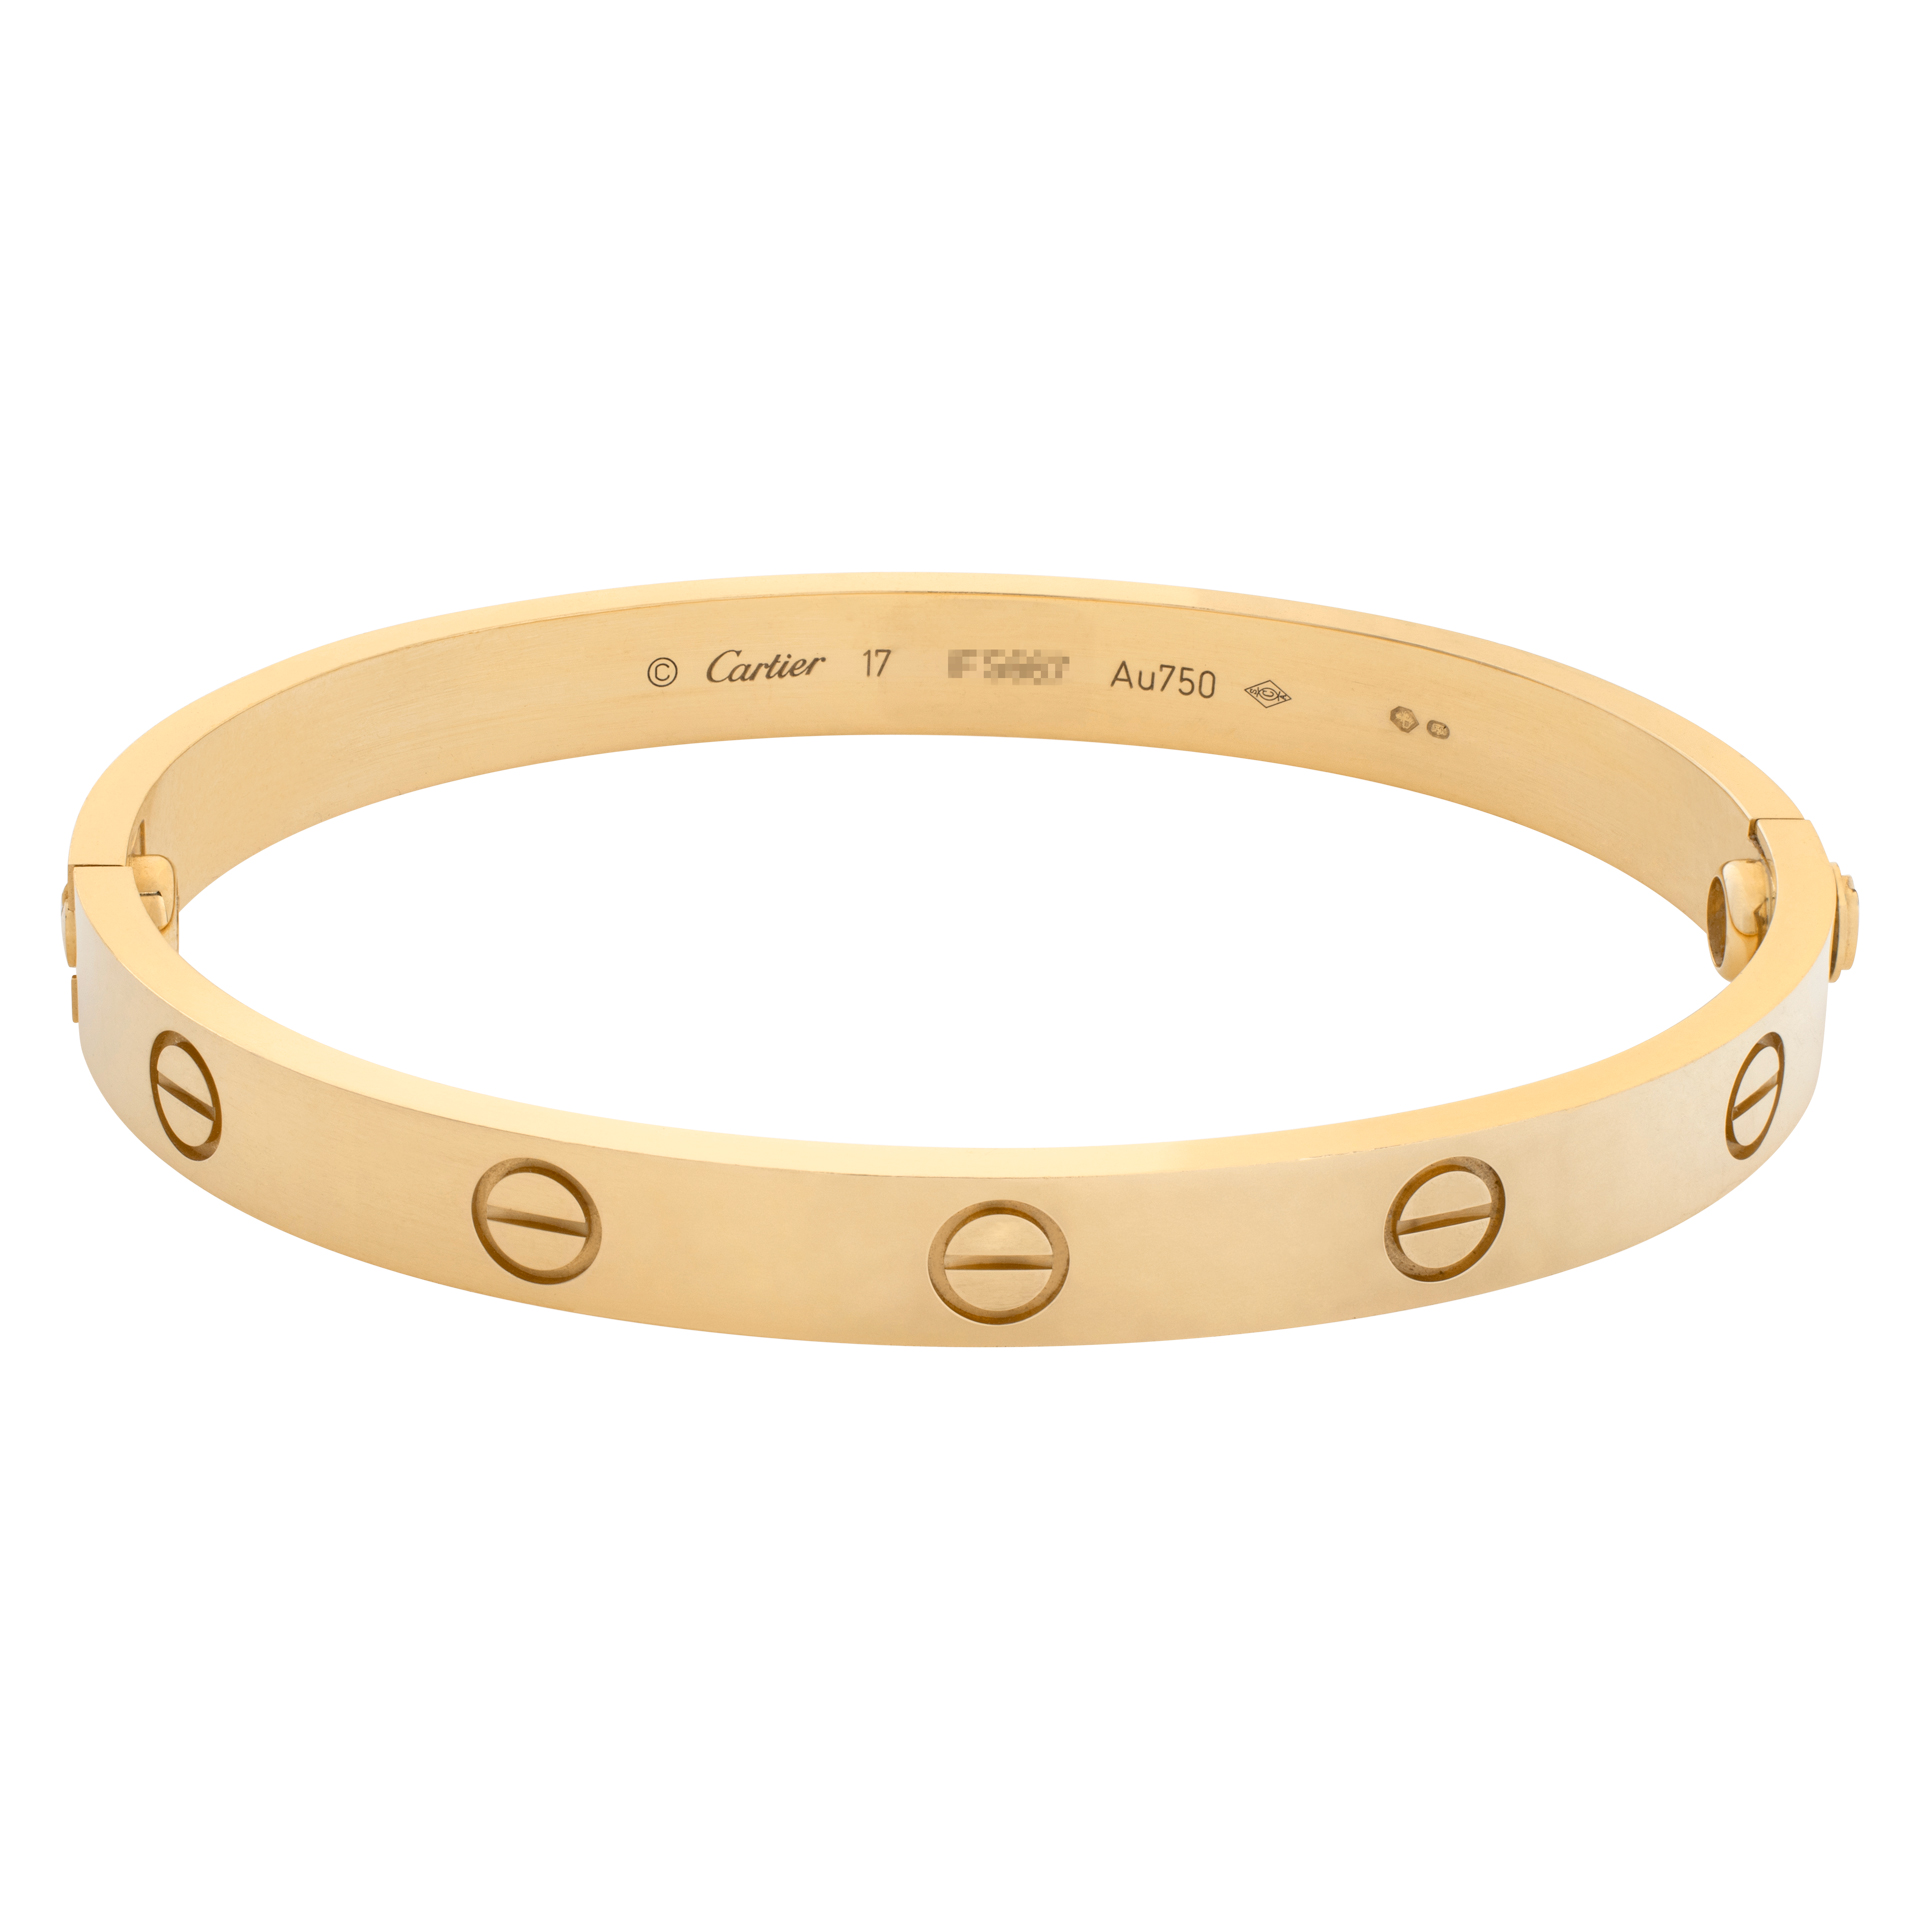 Cartier Love Bracelet in 18K Yellow Gold Size 17- Complete with Box, Cartier Certificate, and Screw Driver